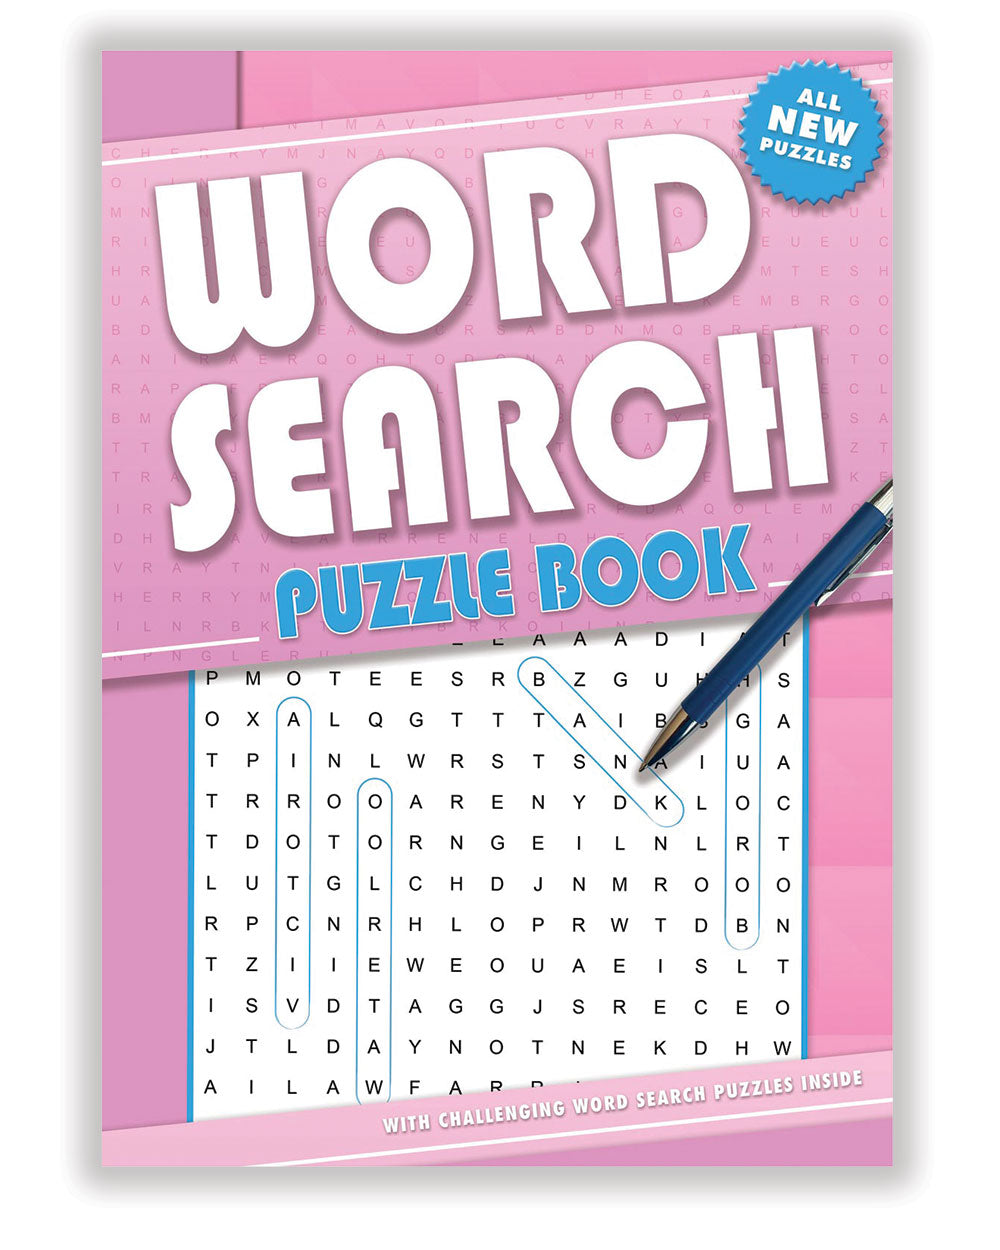 word search puzzle books activity for kids and adults with a pink cover